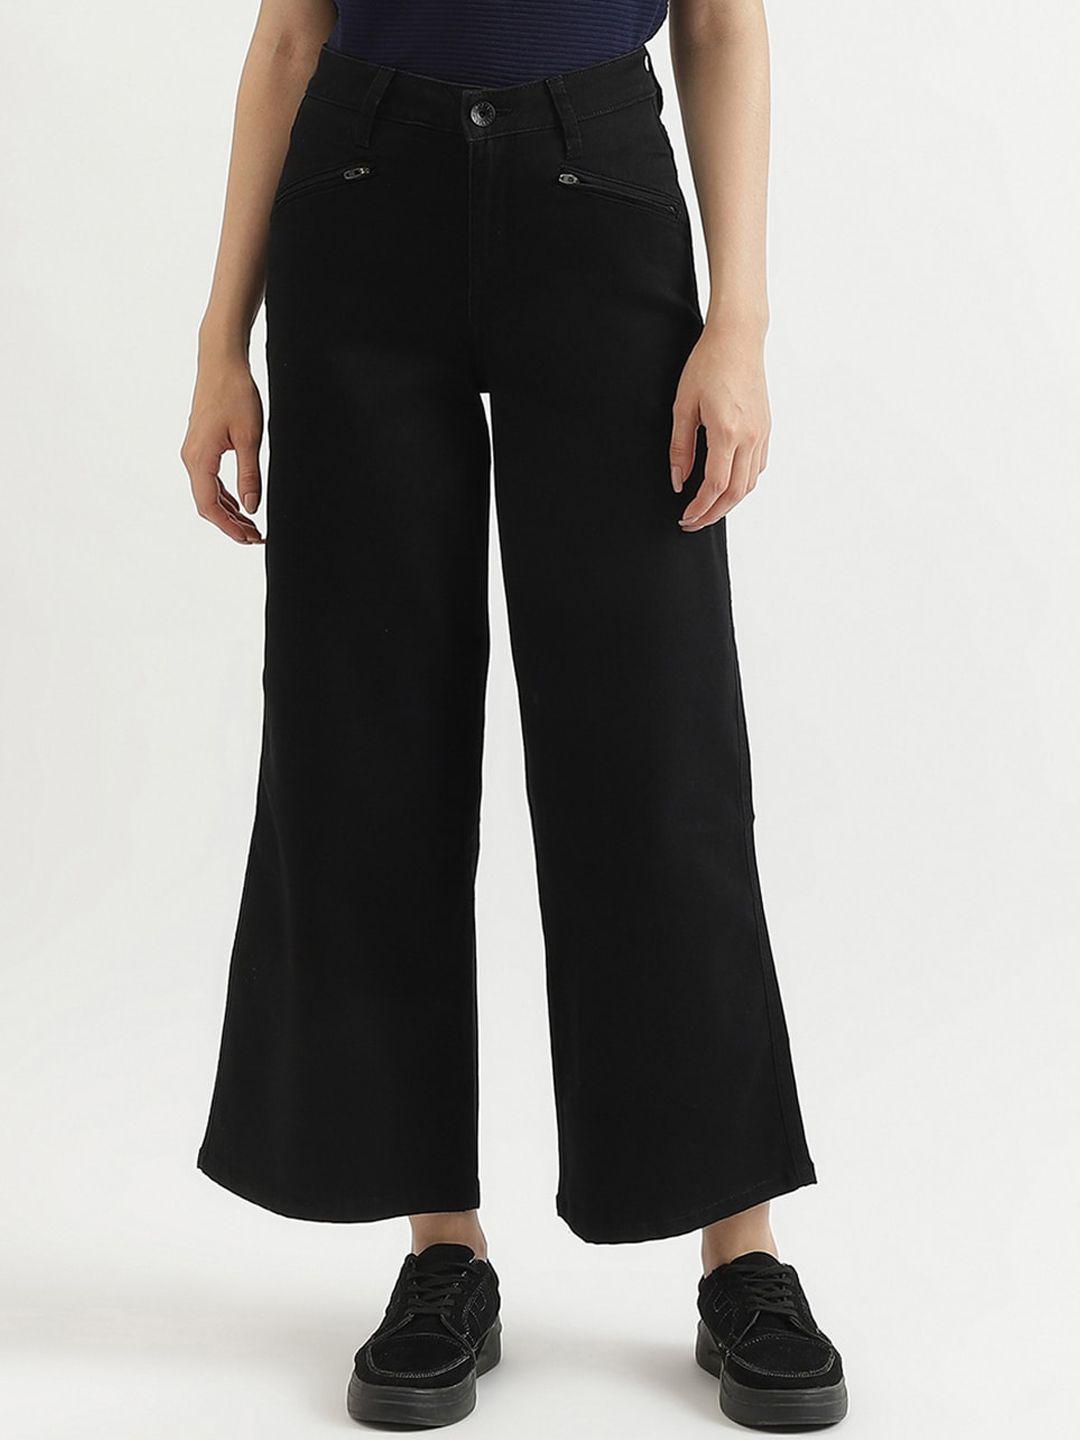 united colors of benetton women black high-rise trousers